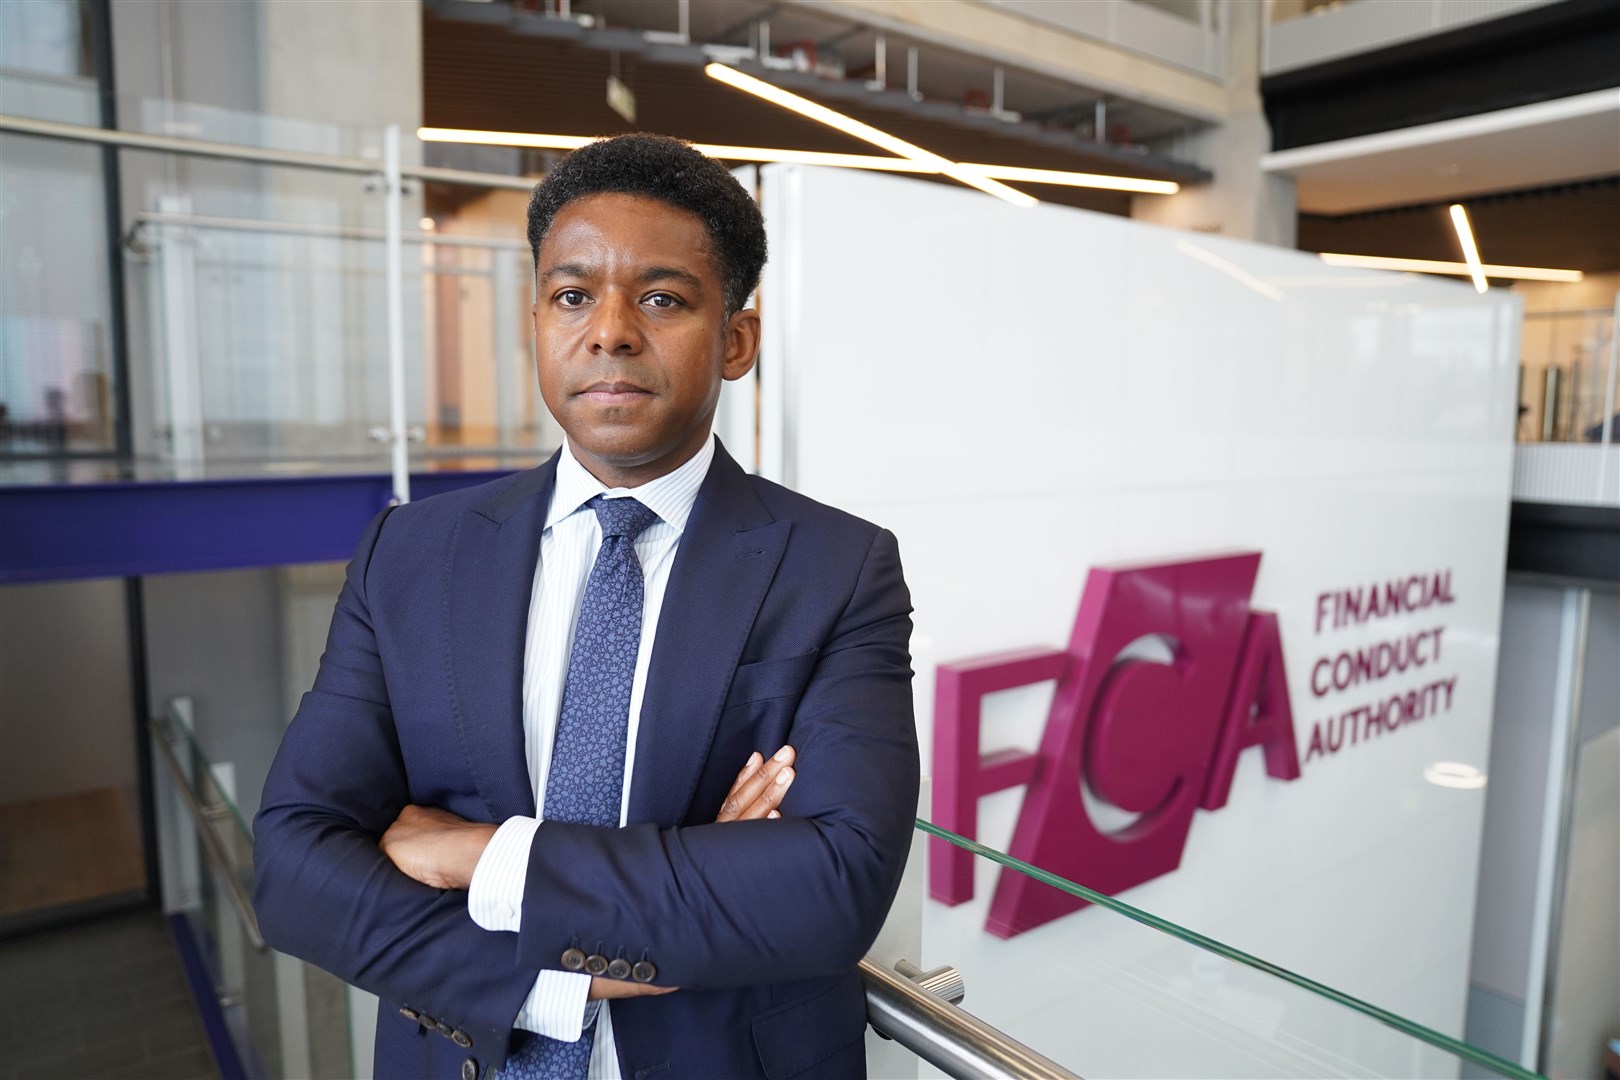 The Financial Conduct Authority’s Sheldon Mills said if the regulator finds widespread misconduct, it will act to make sure people are compensated in an orderly, consistent and efficient way (Stefan Rousseau/PA)